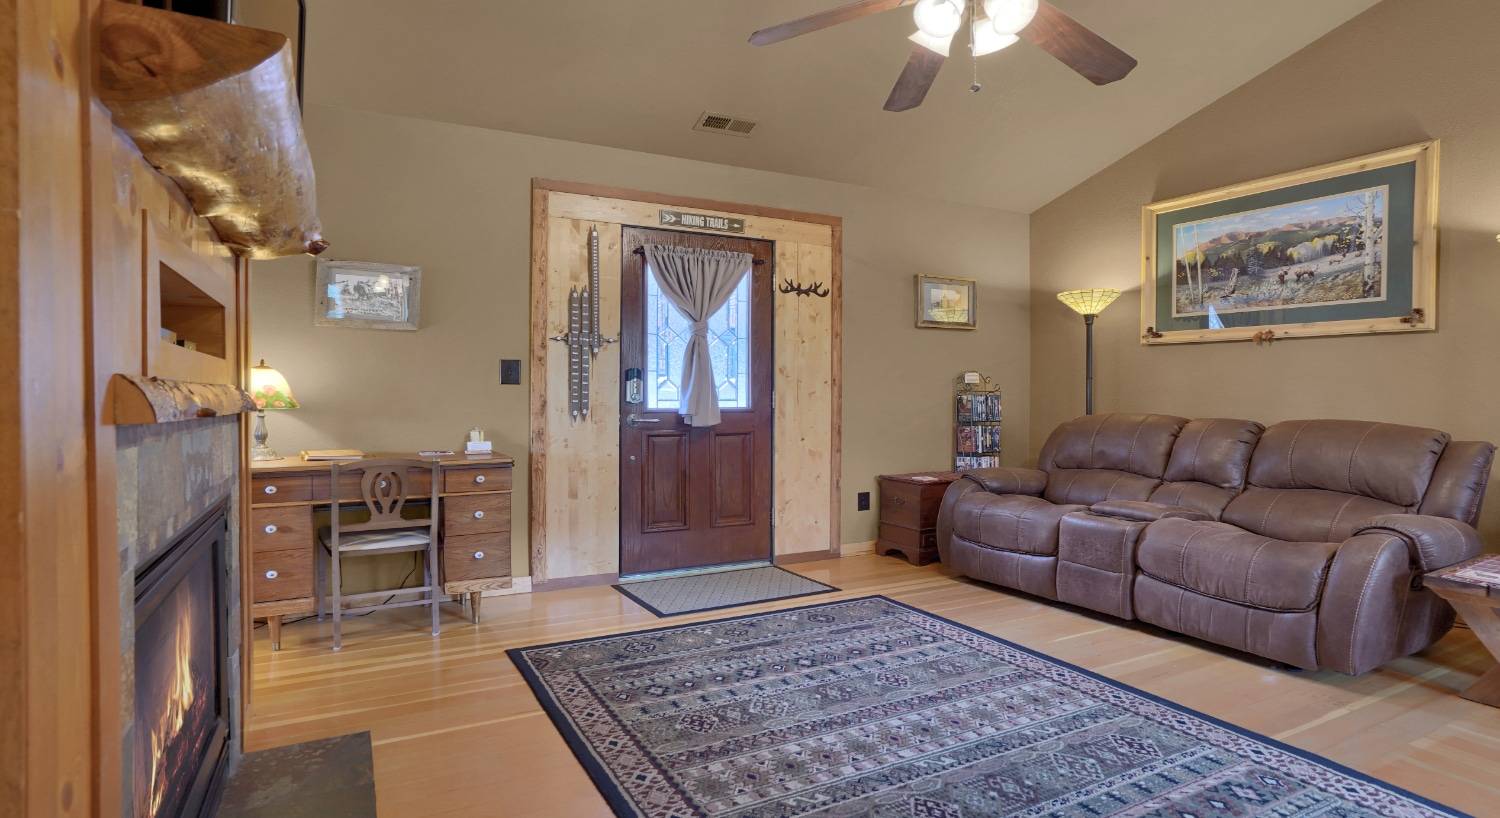 sitting room with sofa, front door, writing desk, ceiling fan, and large area rug